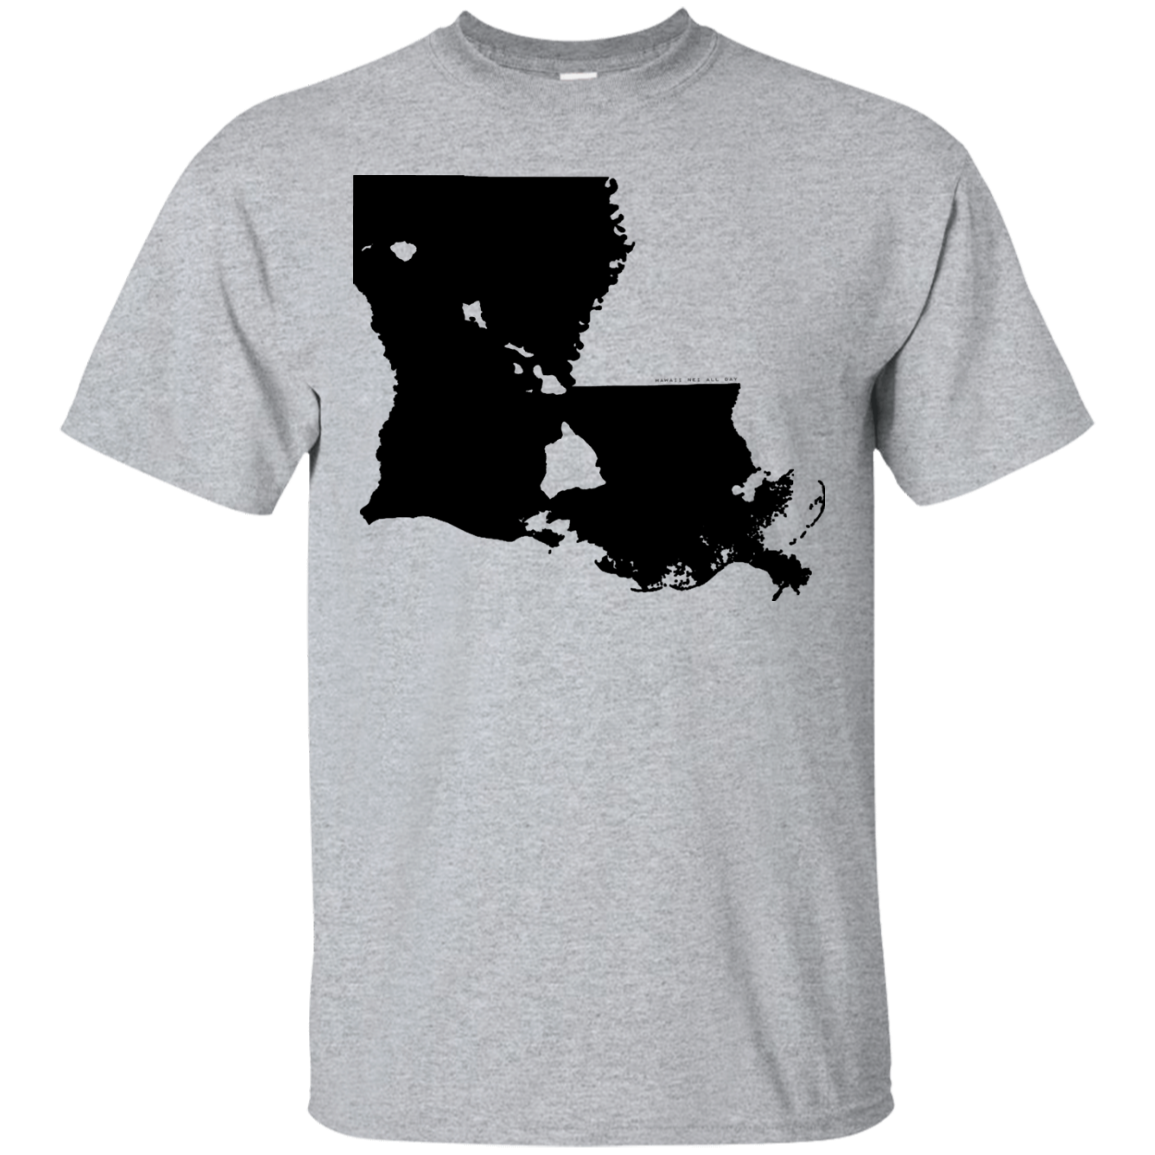 Living in Louisiana with Hawaii Roots Ultra Cotton T-Shirt, T-Shirts, Hawaii Nei All Day